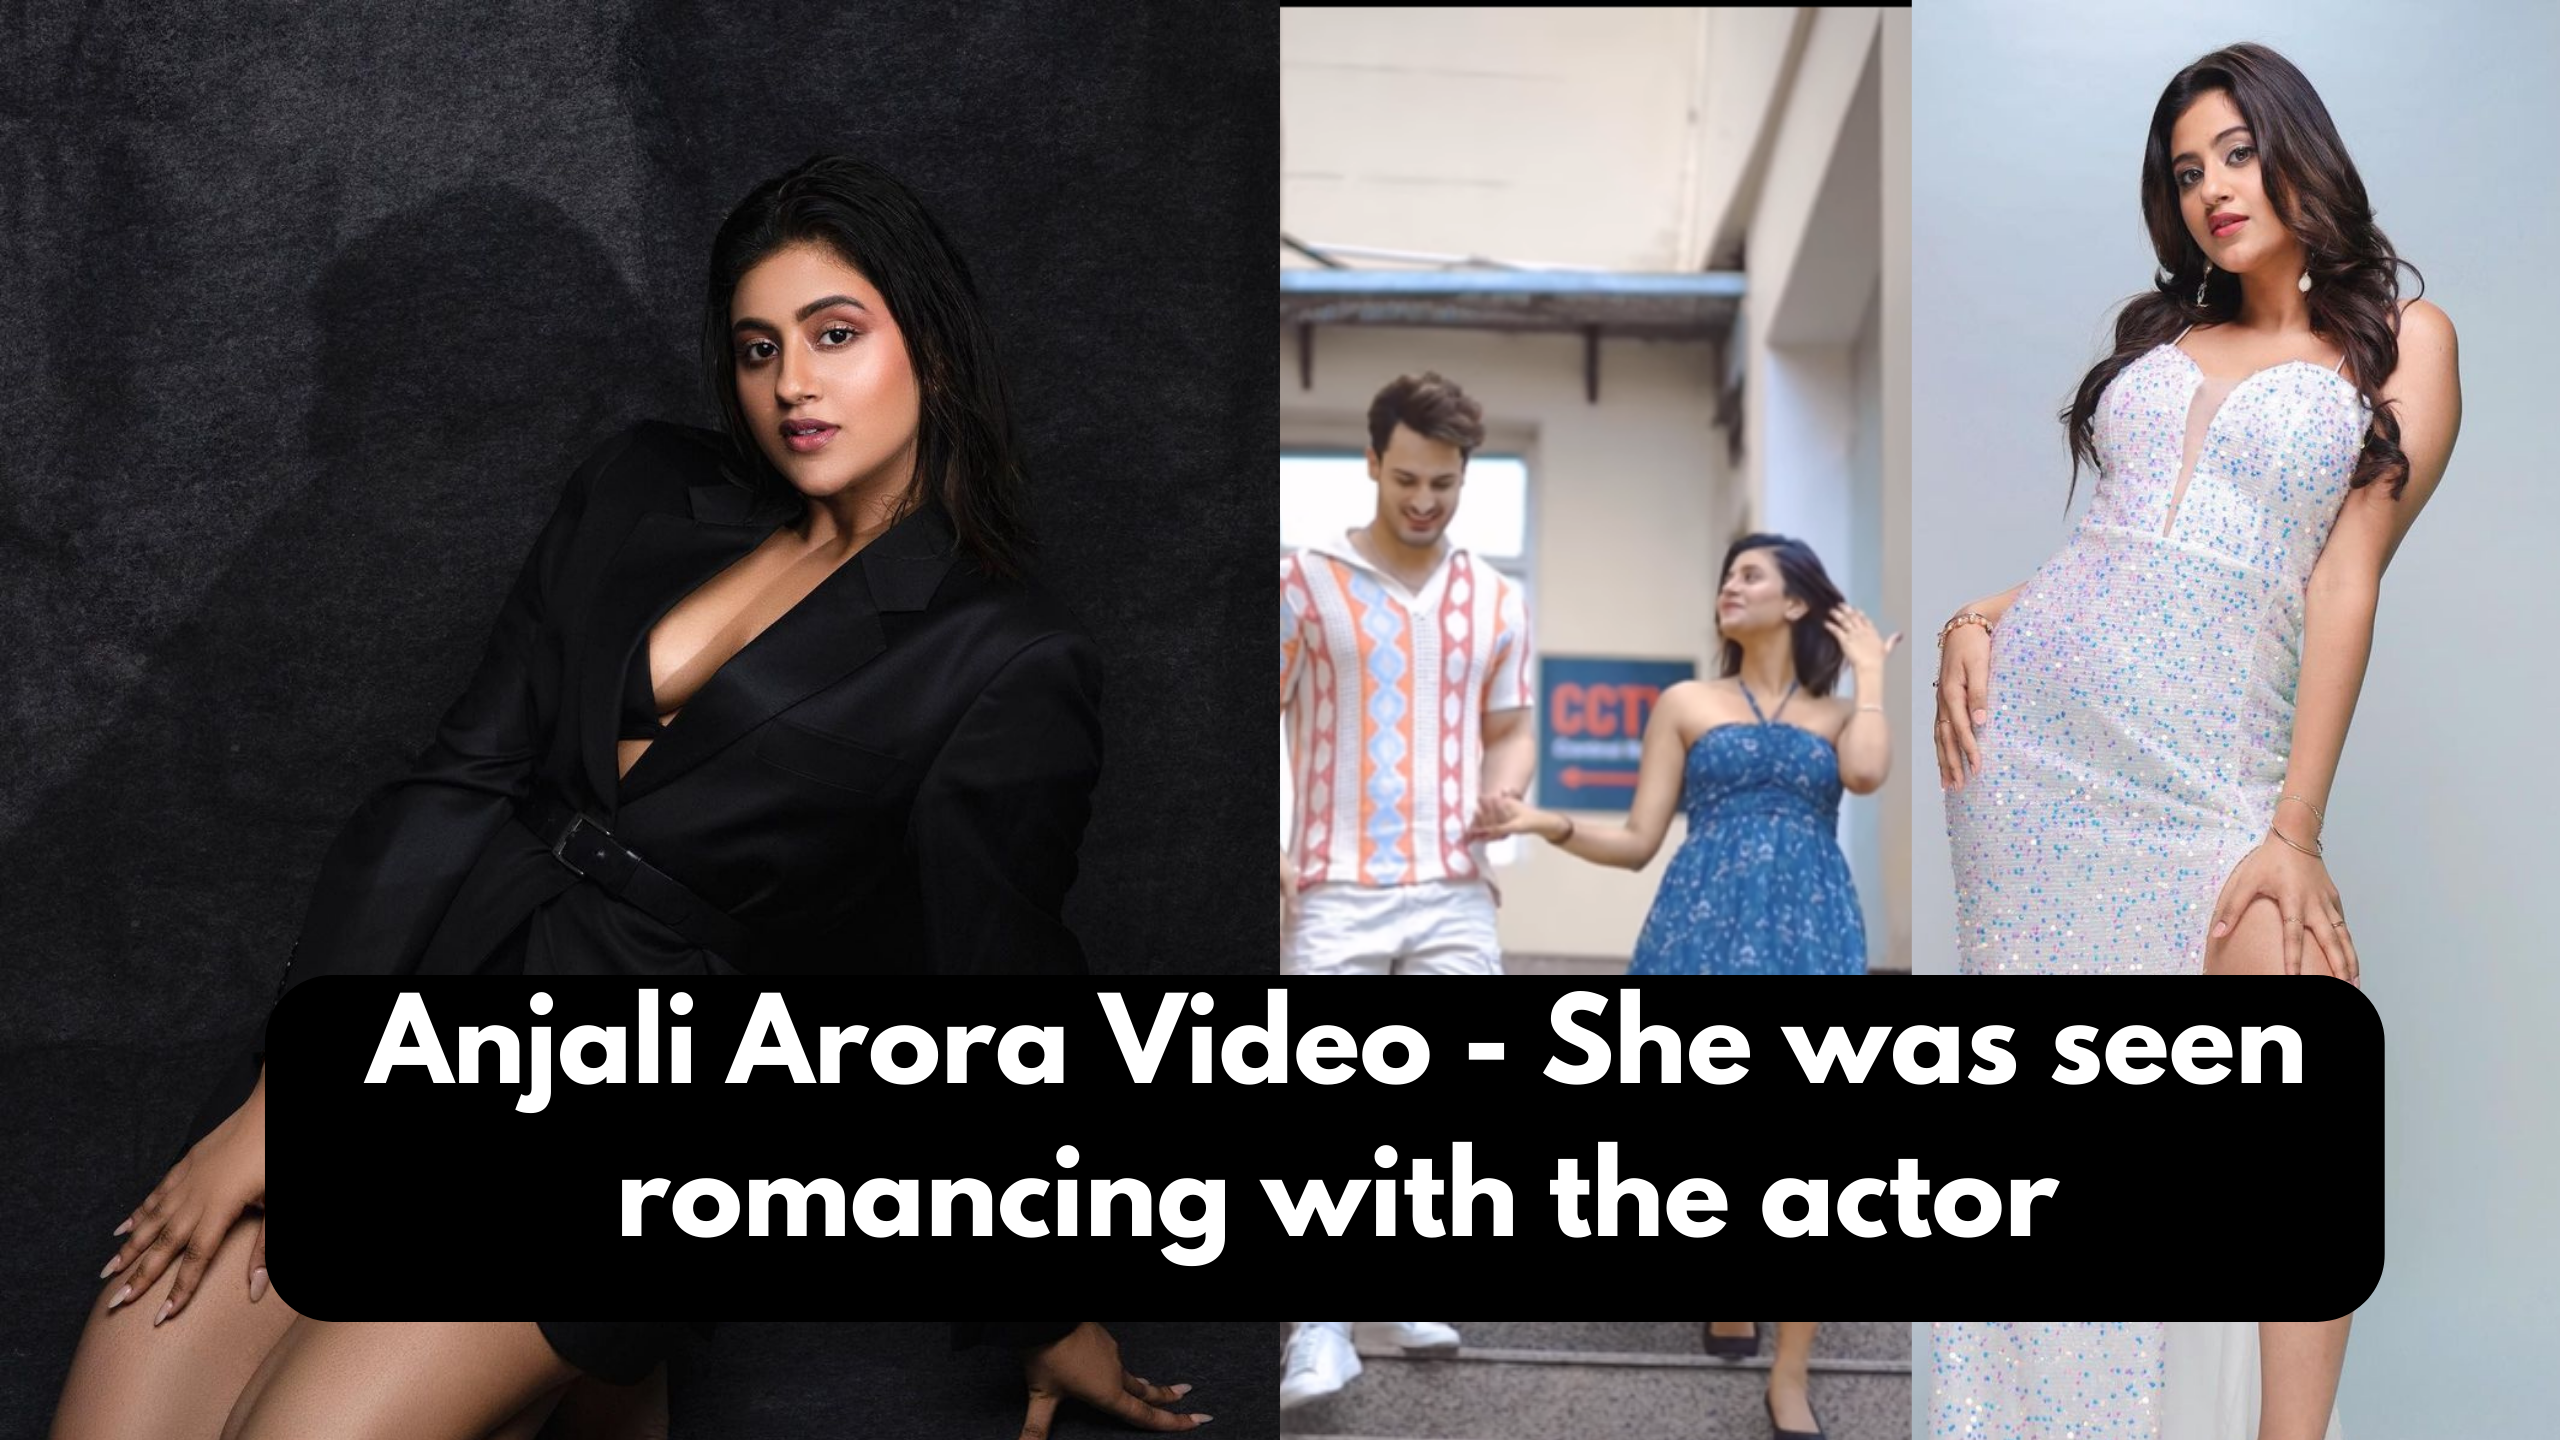 Anjali Sexy Video - Anjali Arora Video - She was seen romancing with the actor Umar Riaz